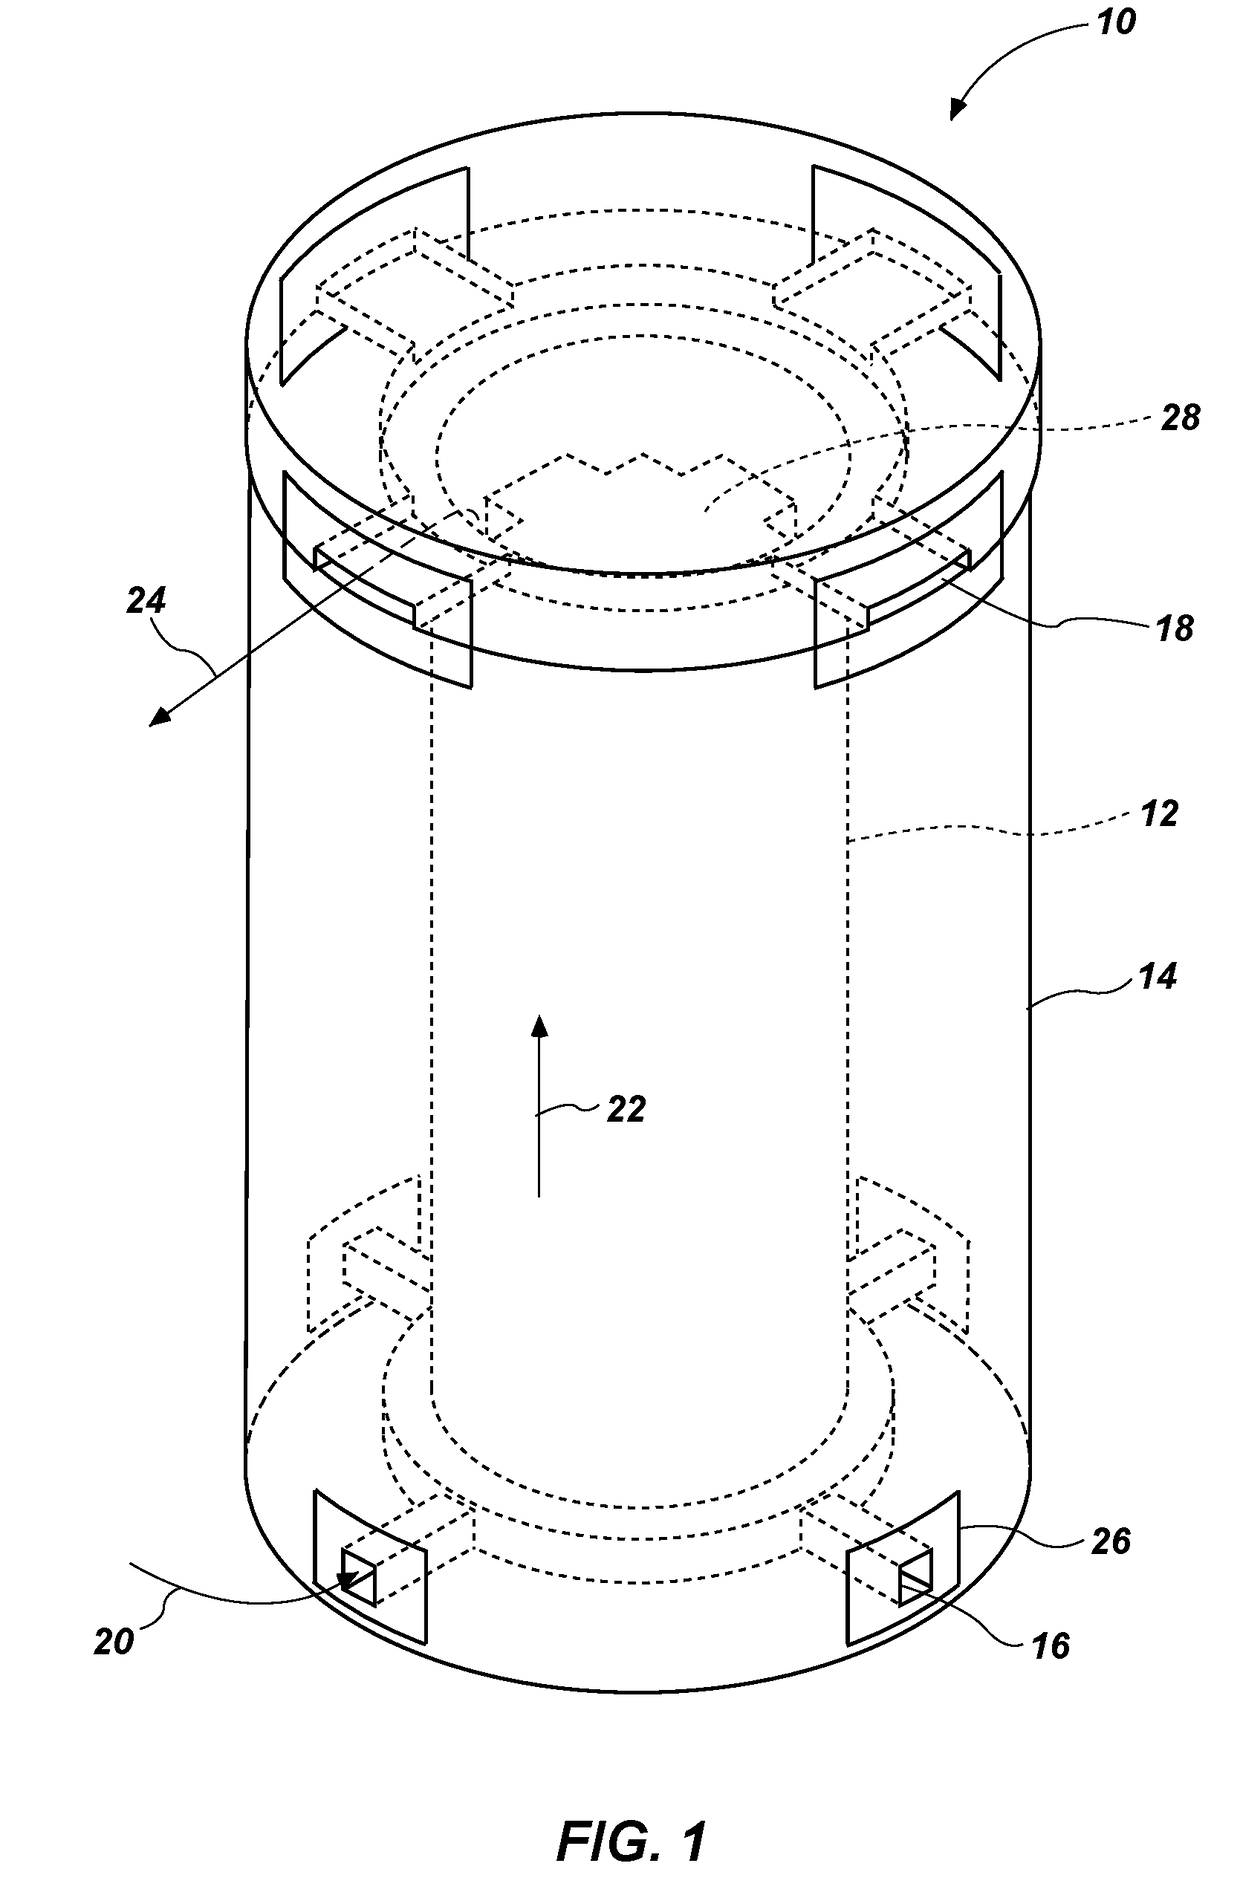 Method and apparatus for online condition monitoring of spent nuclear fuel dry cask storage systems